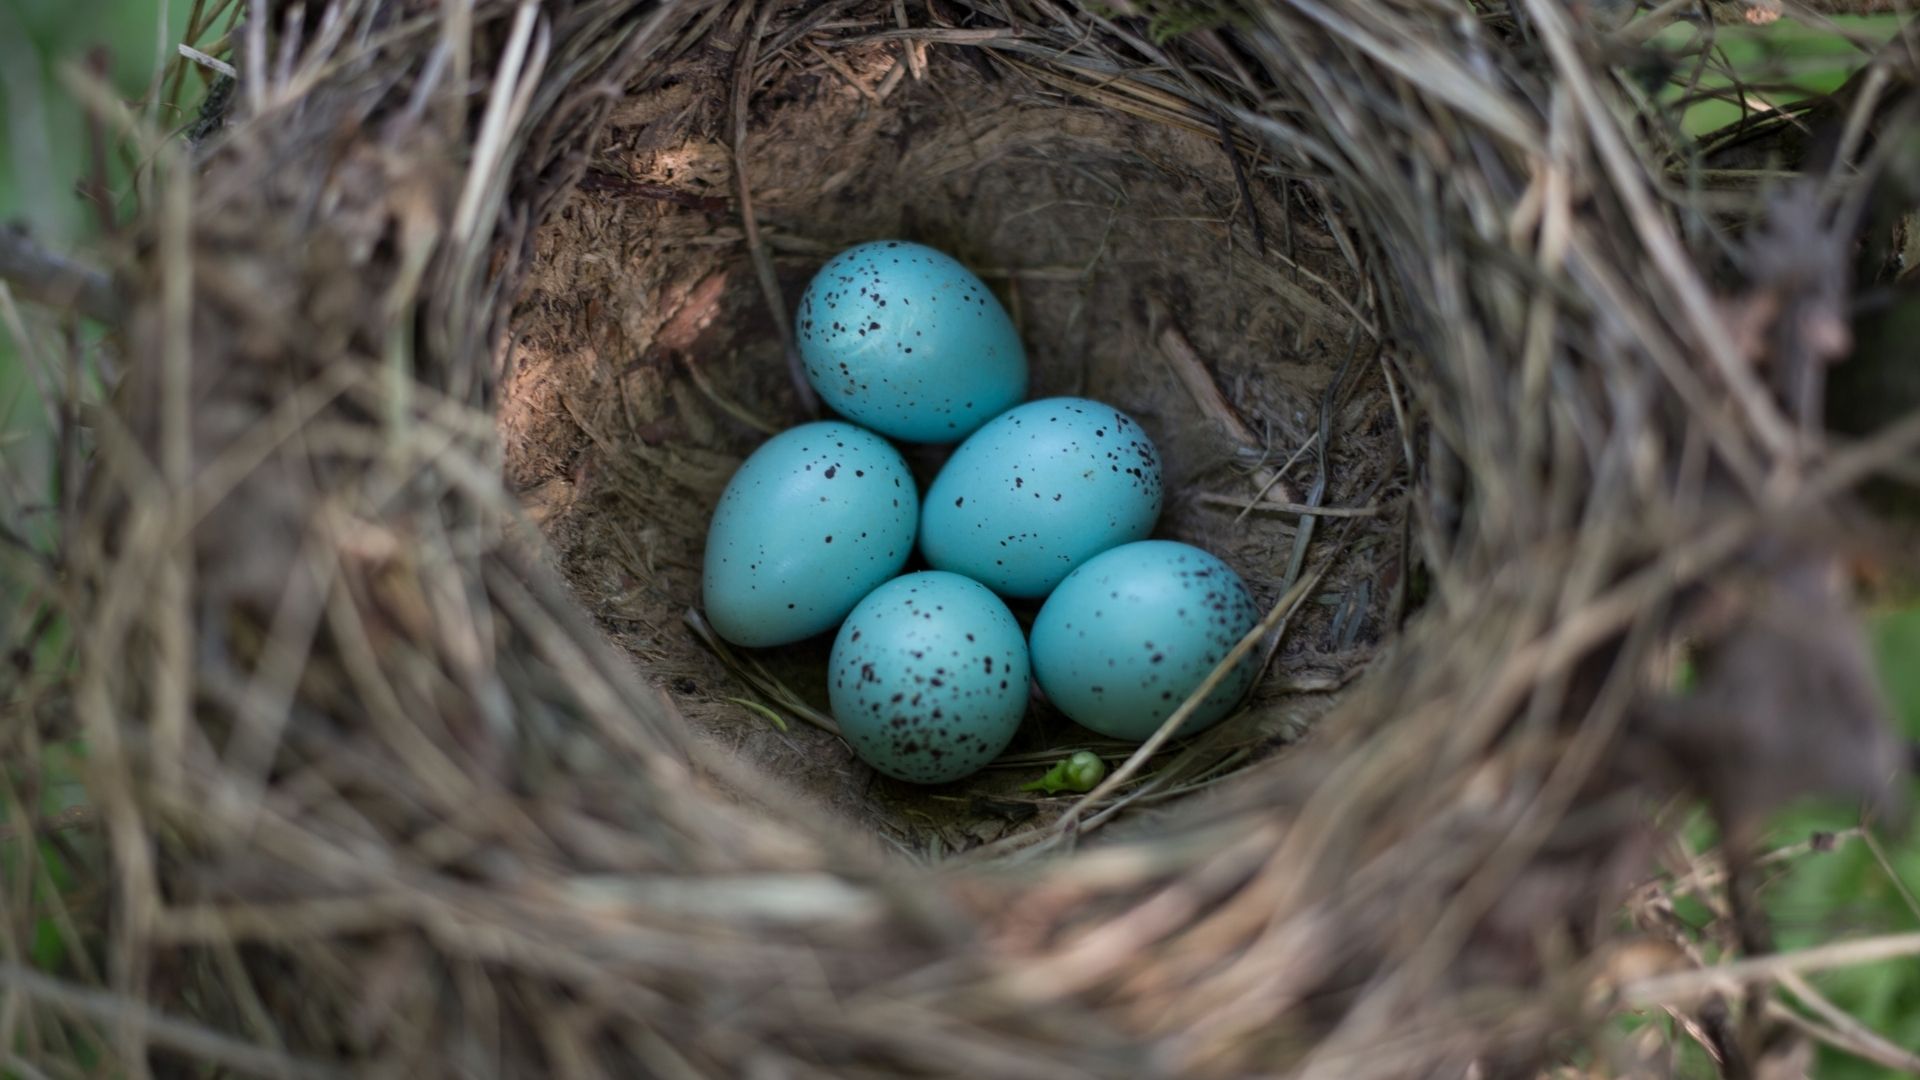 Decorative Image of a bird's nest with blue eggs inside.